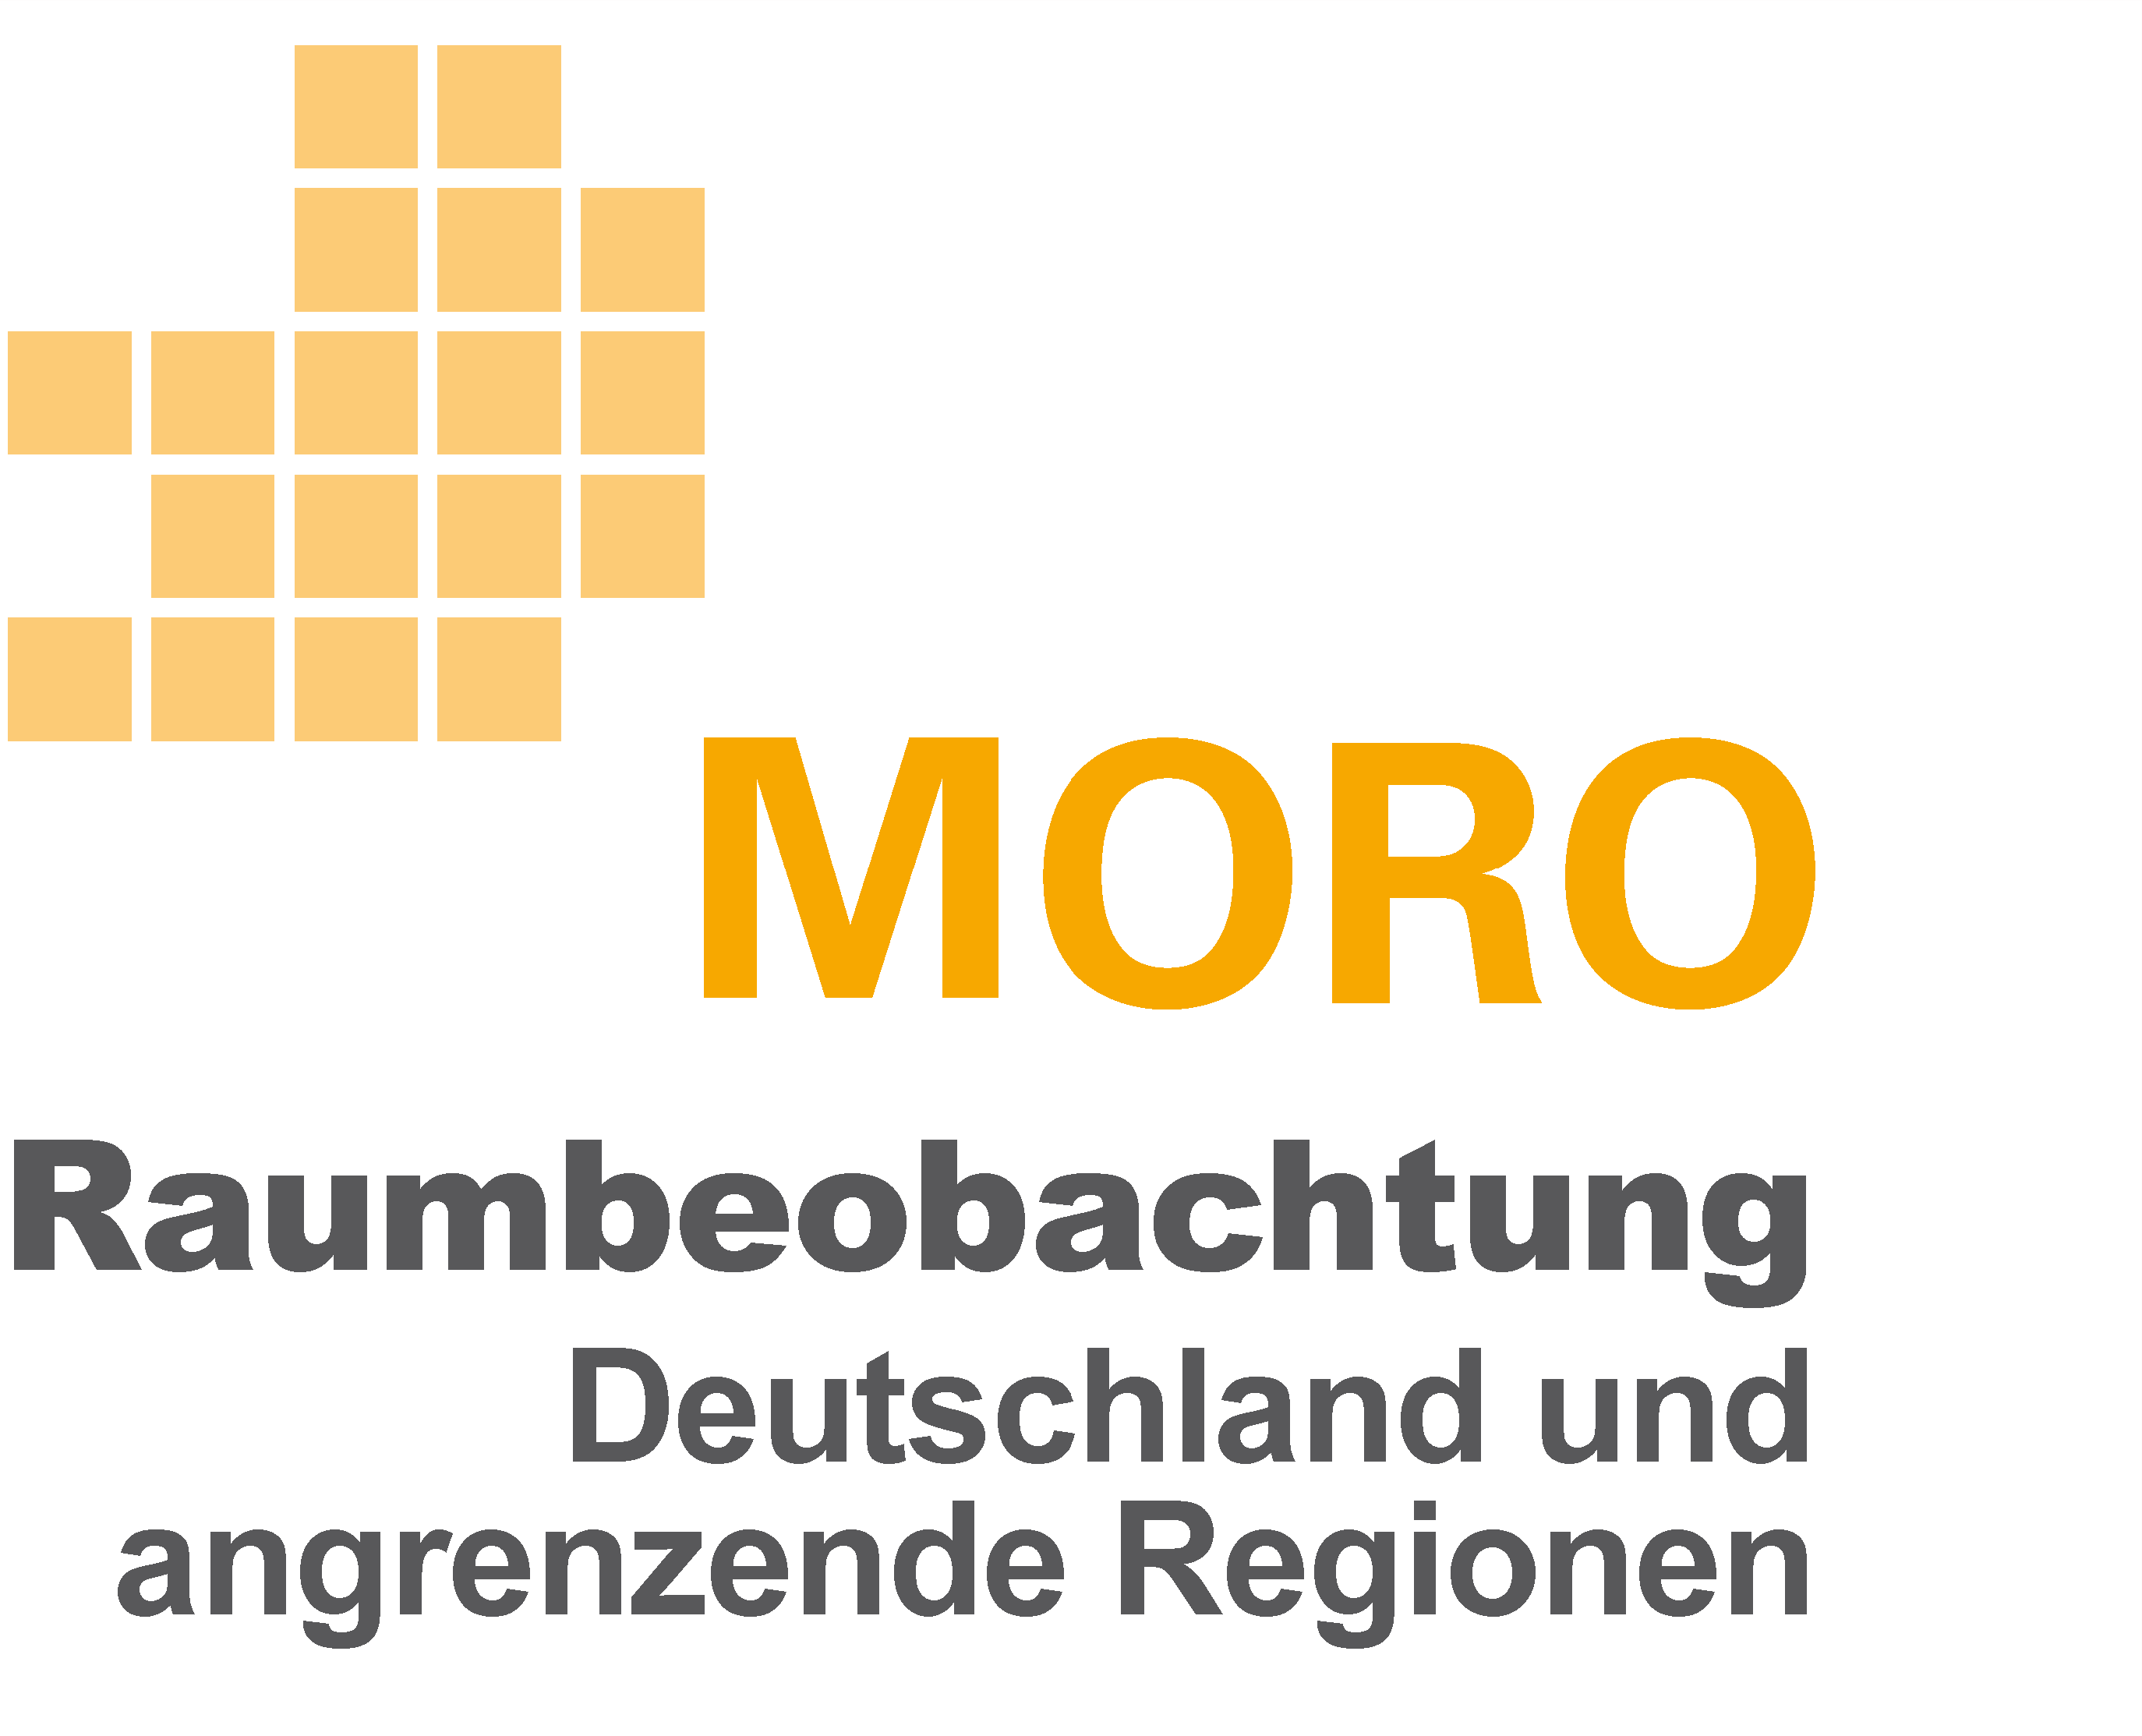 Spatial Monitoring Germany and Neighbouring Regions (2015-2017)